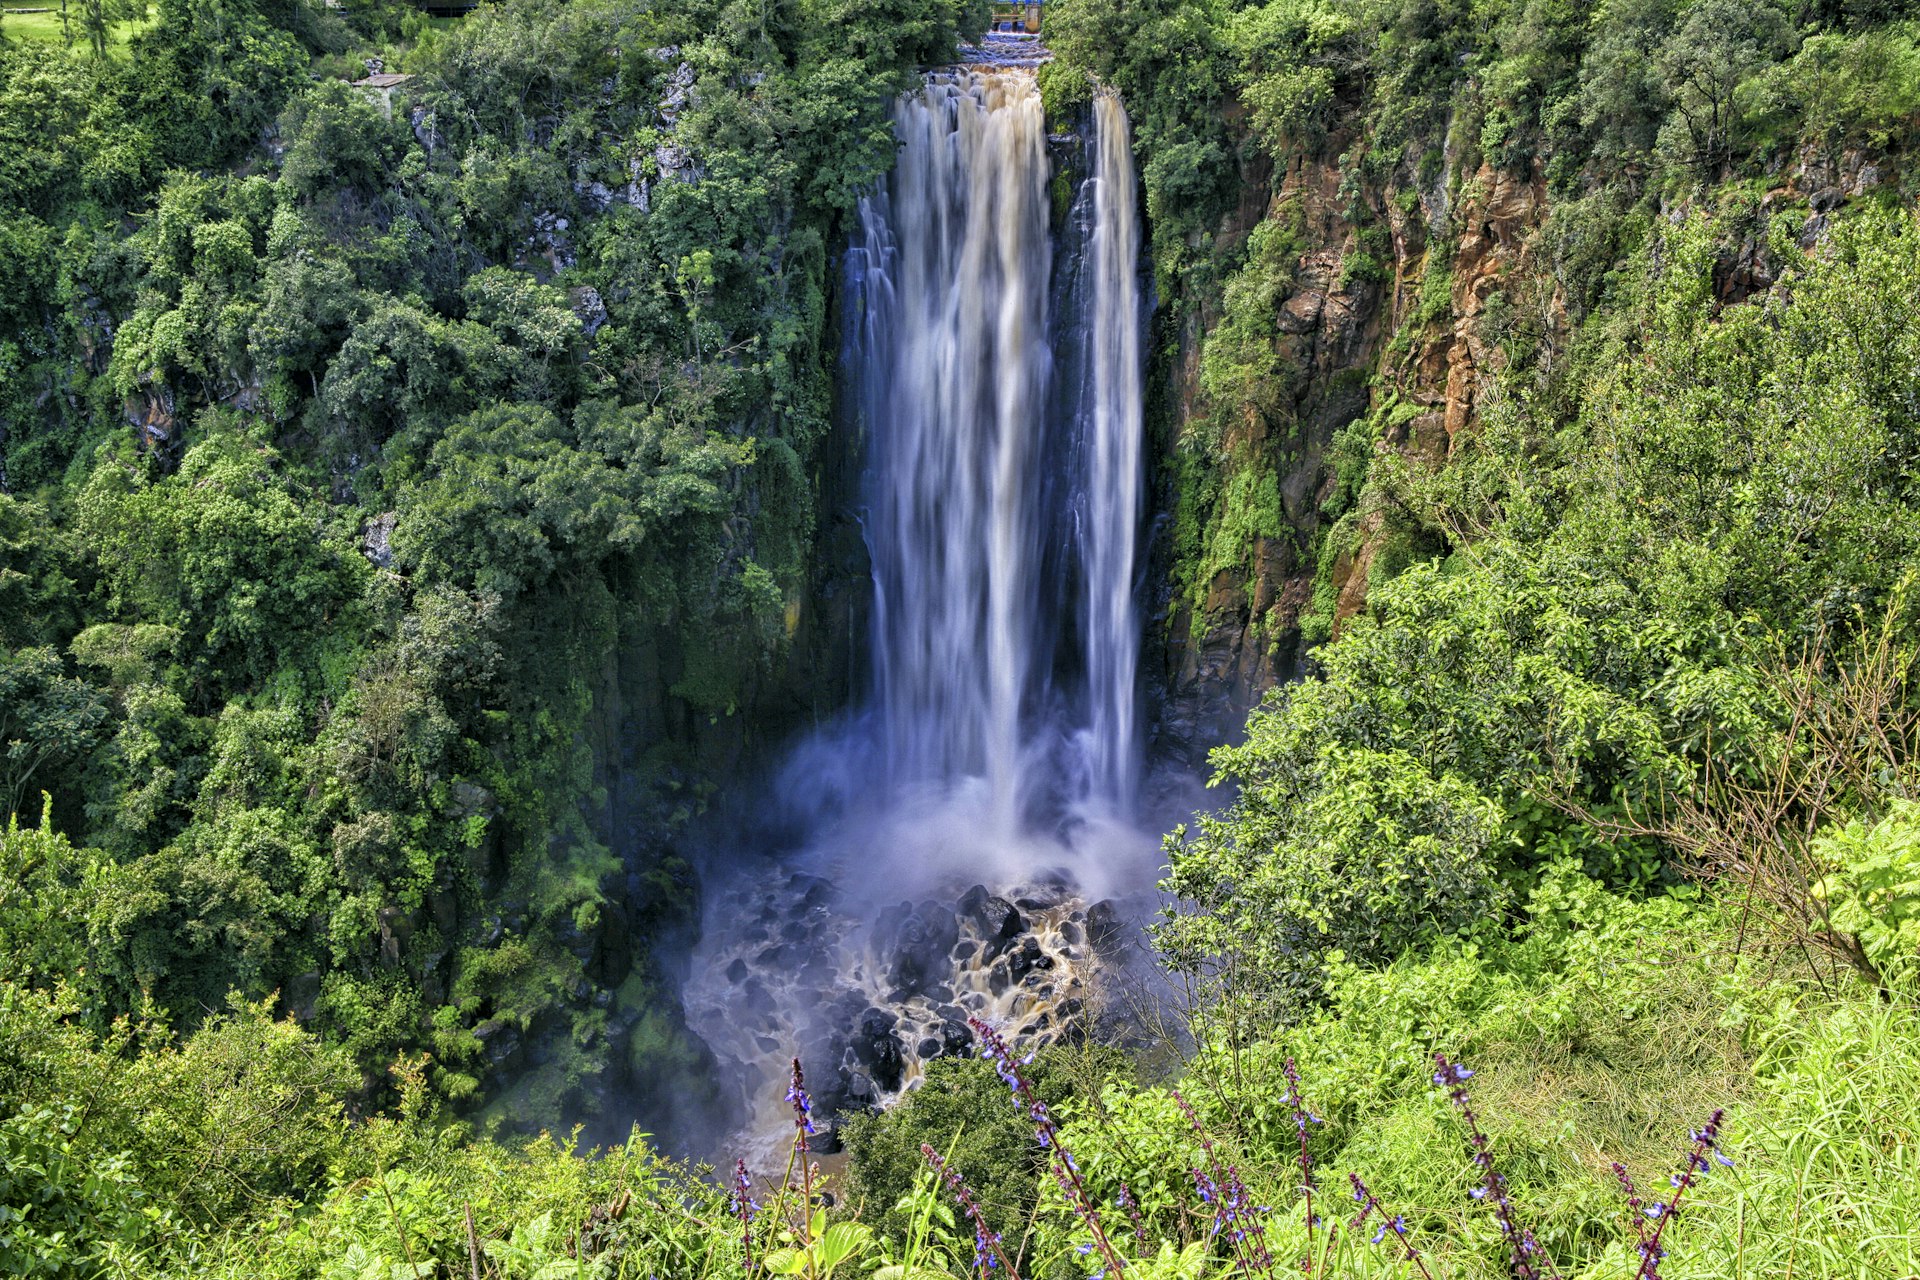 A shot of Thomson's Falls in Aberdare National Park from afar, the waterfall gushing down into a pool that's surrounded by thick greenery